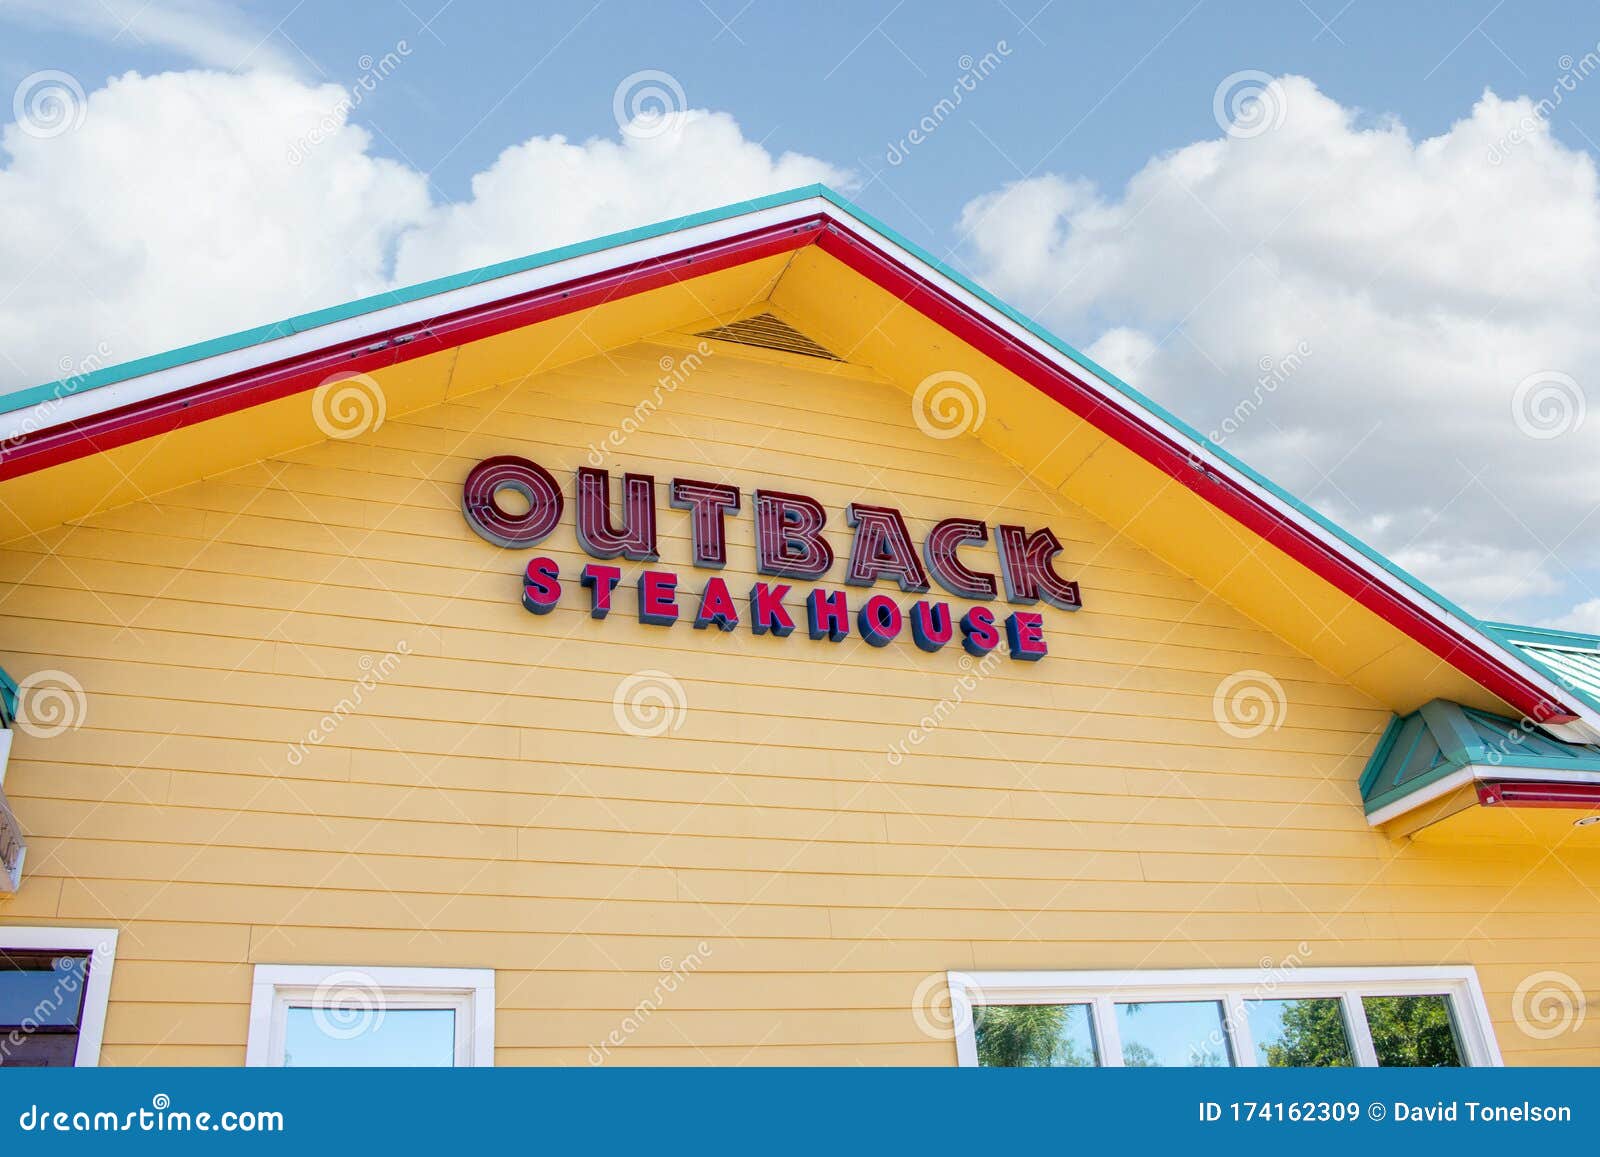 Outback sign editorial stock image. Image of cafe, commerce - 174162309